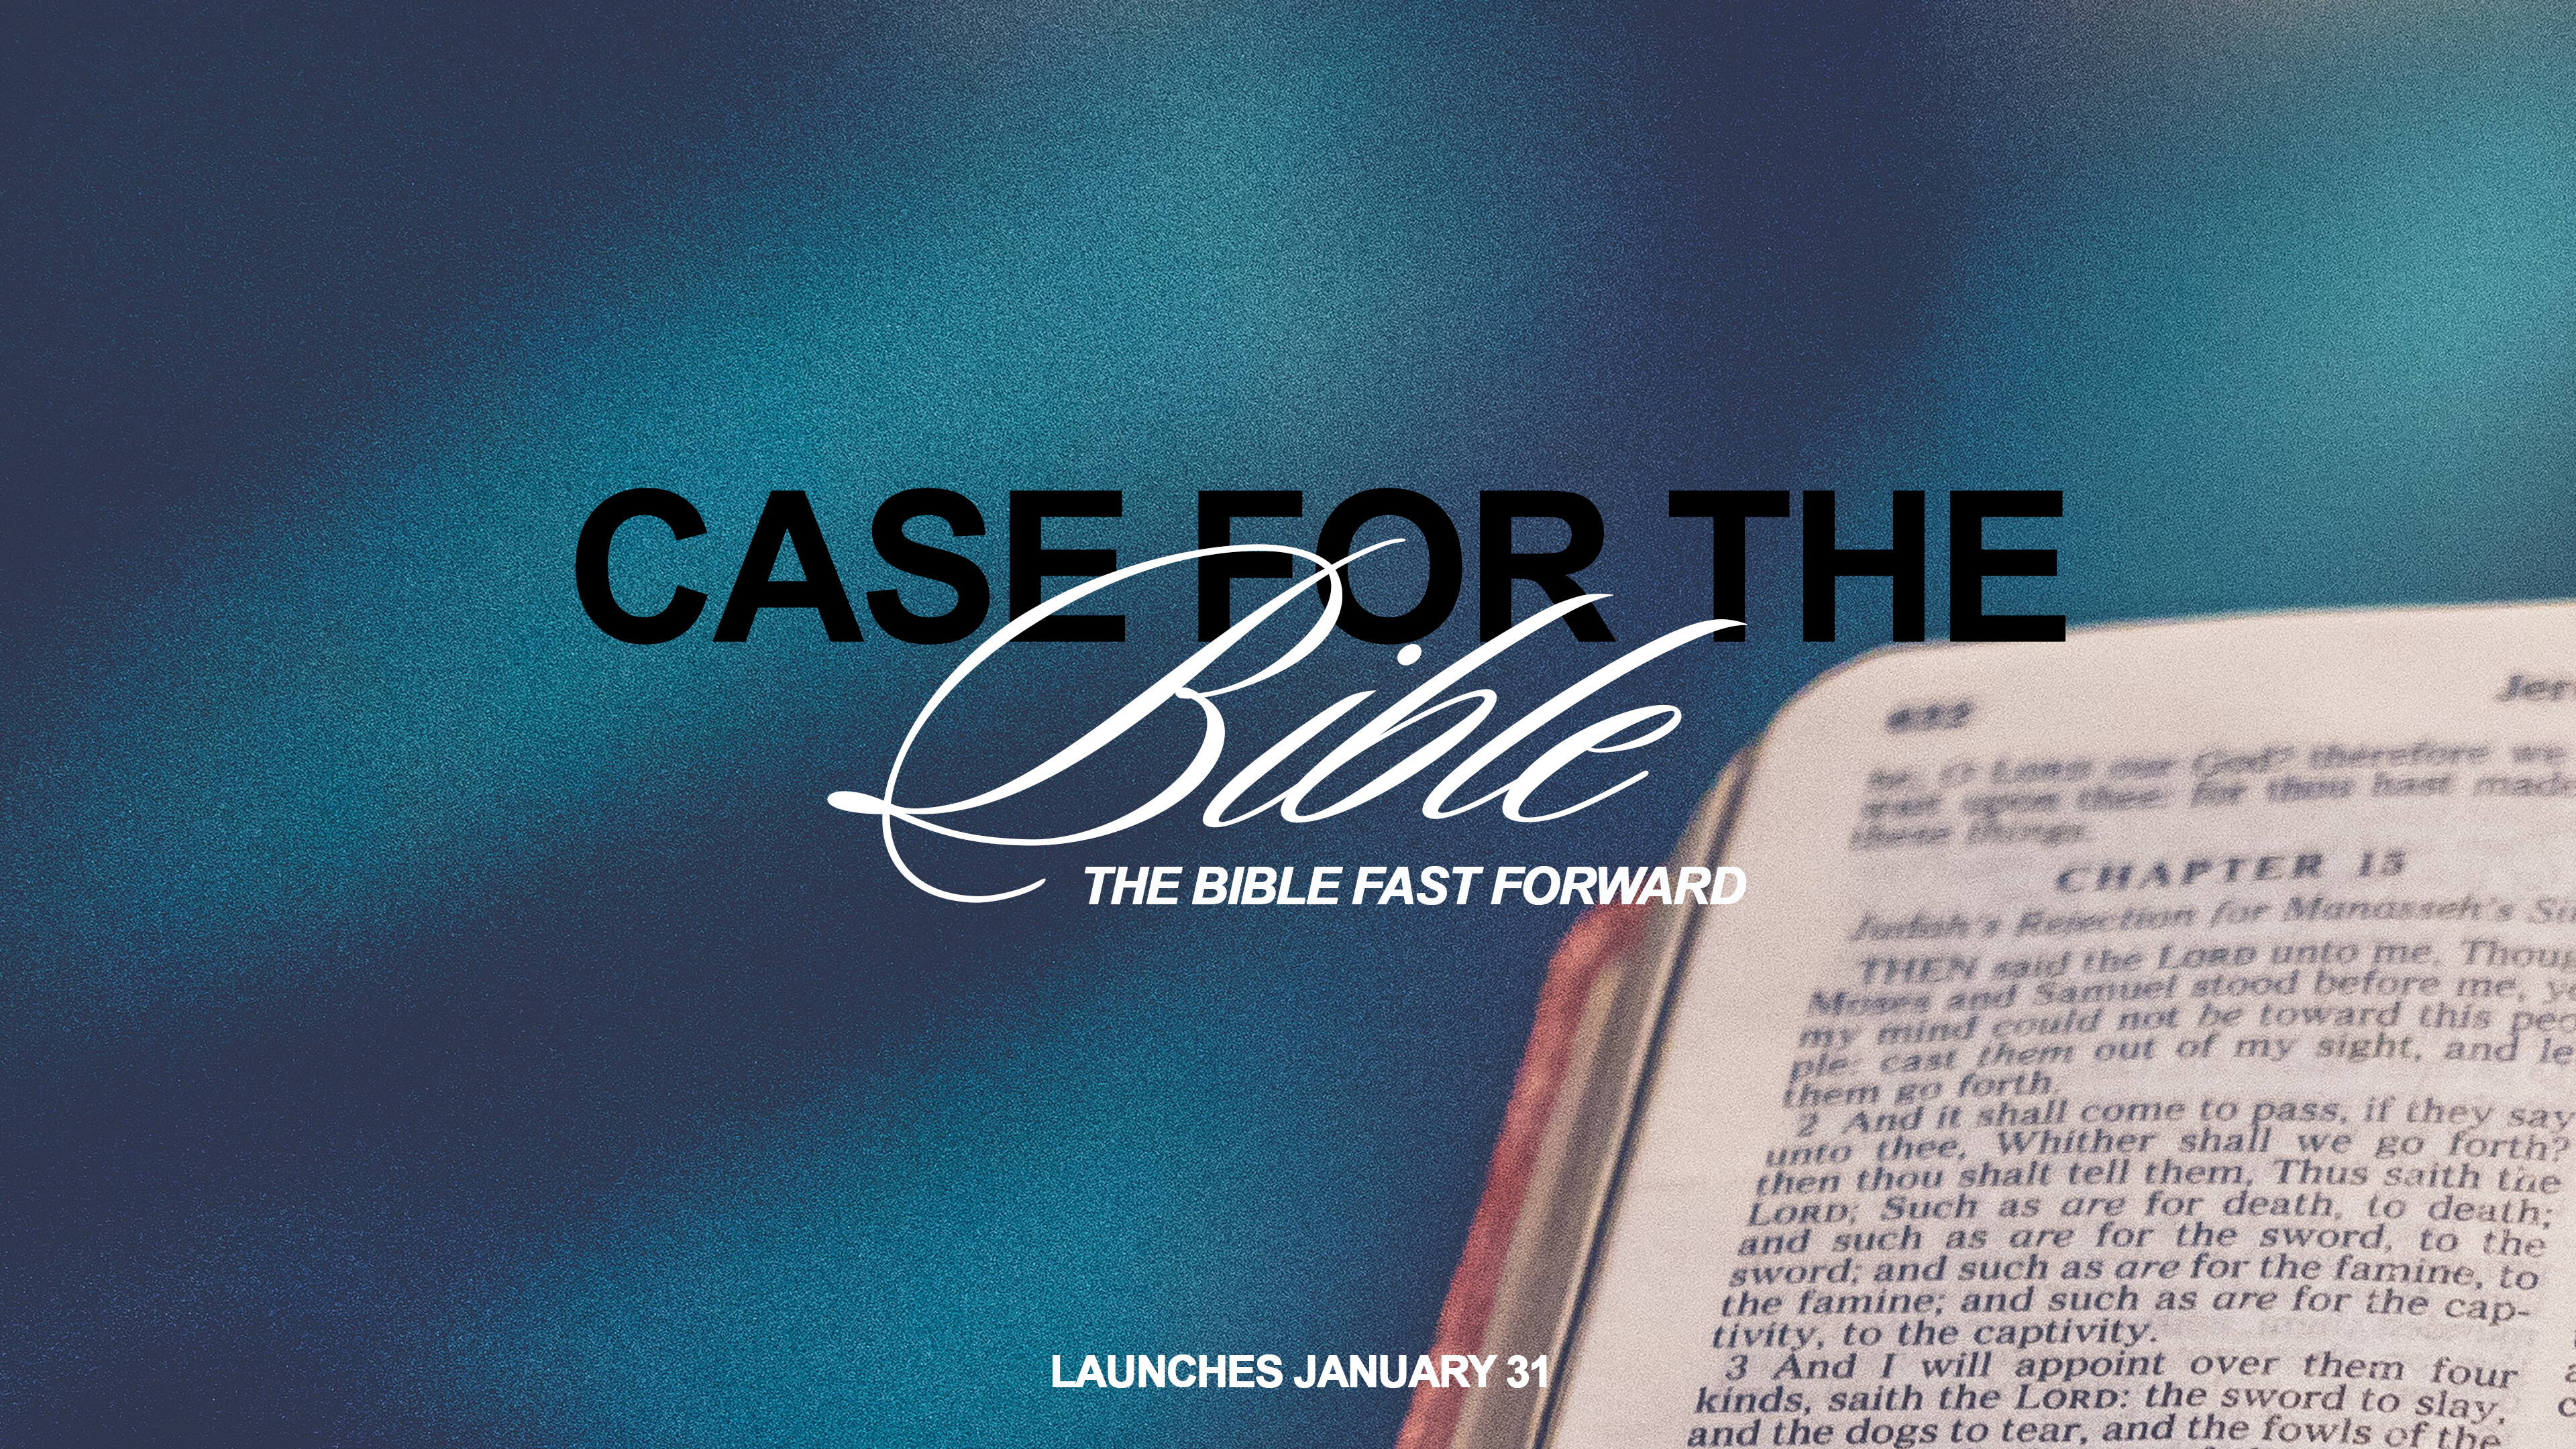 A Case for the Bible: The Bible Fast Forward